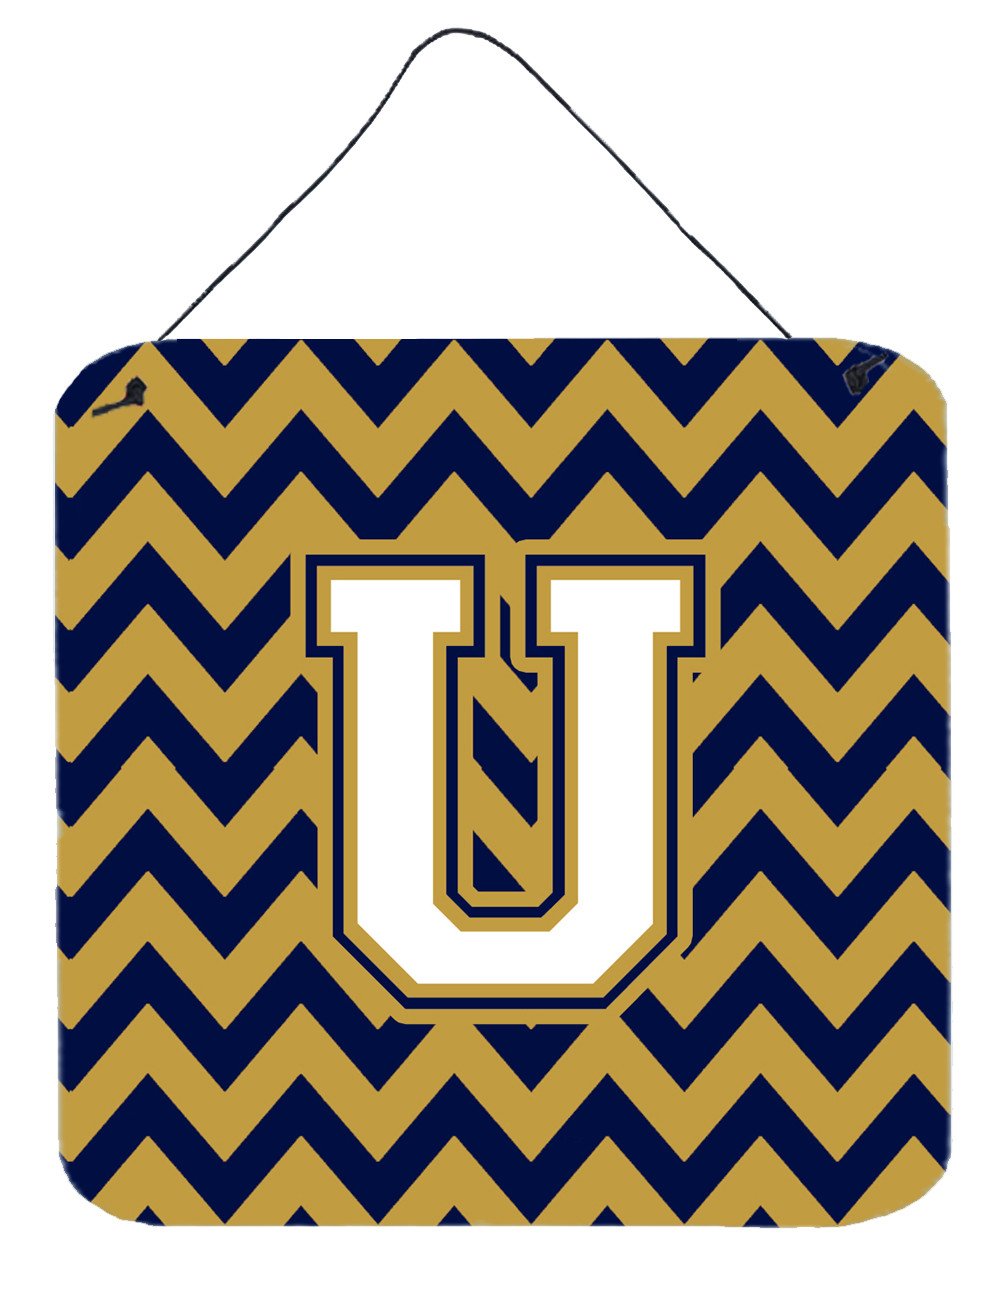 Letter U Chevron Navy Blue and Gold Wall or Door Hanging Prints CJ1057-UDS66 by Caroline's Treasures